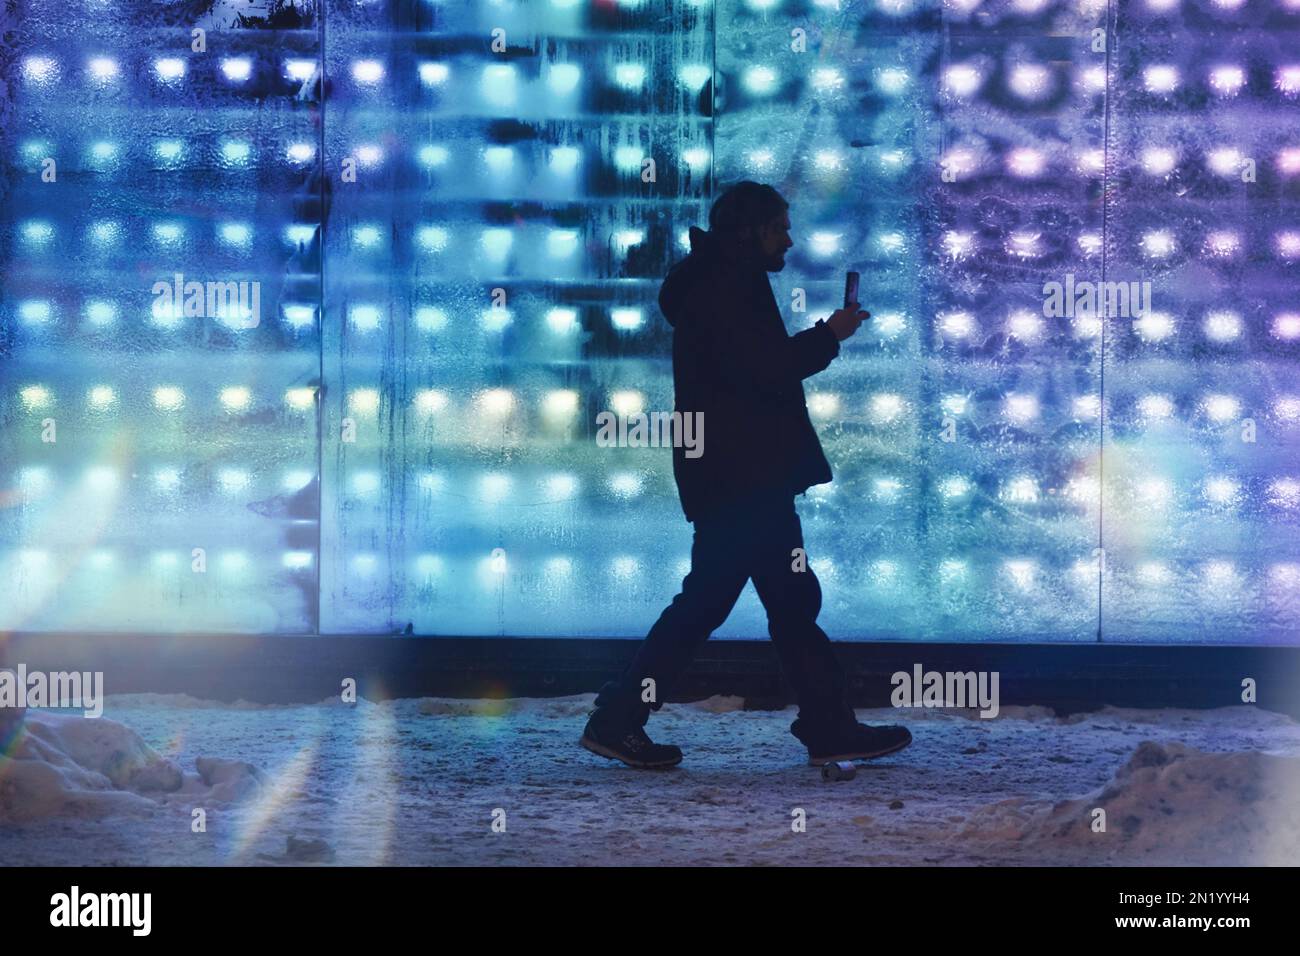 Person walking in front of frosted store front windows in sub-zero weather. Stock Photo